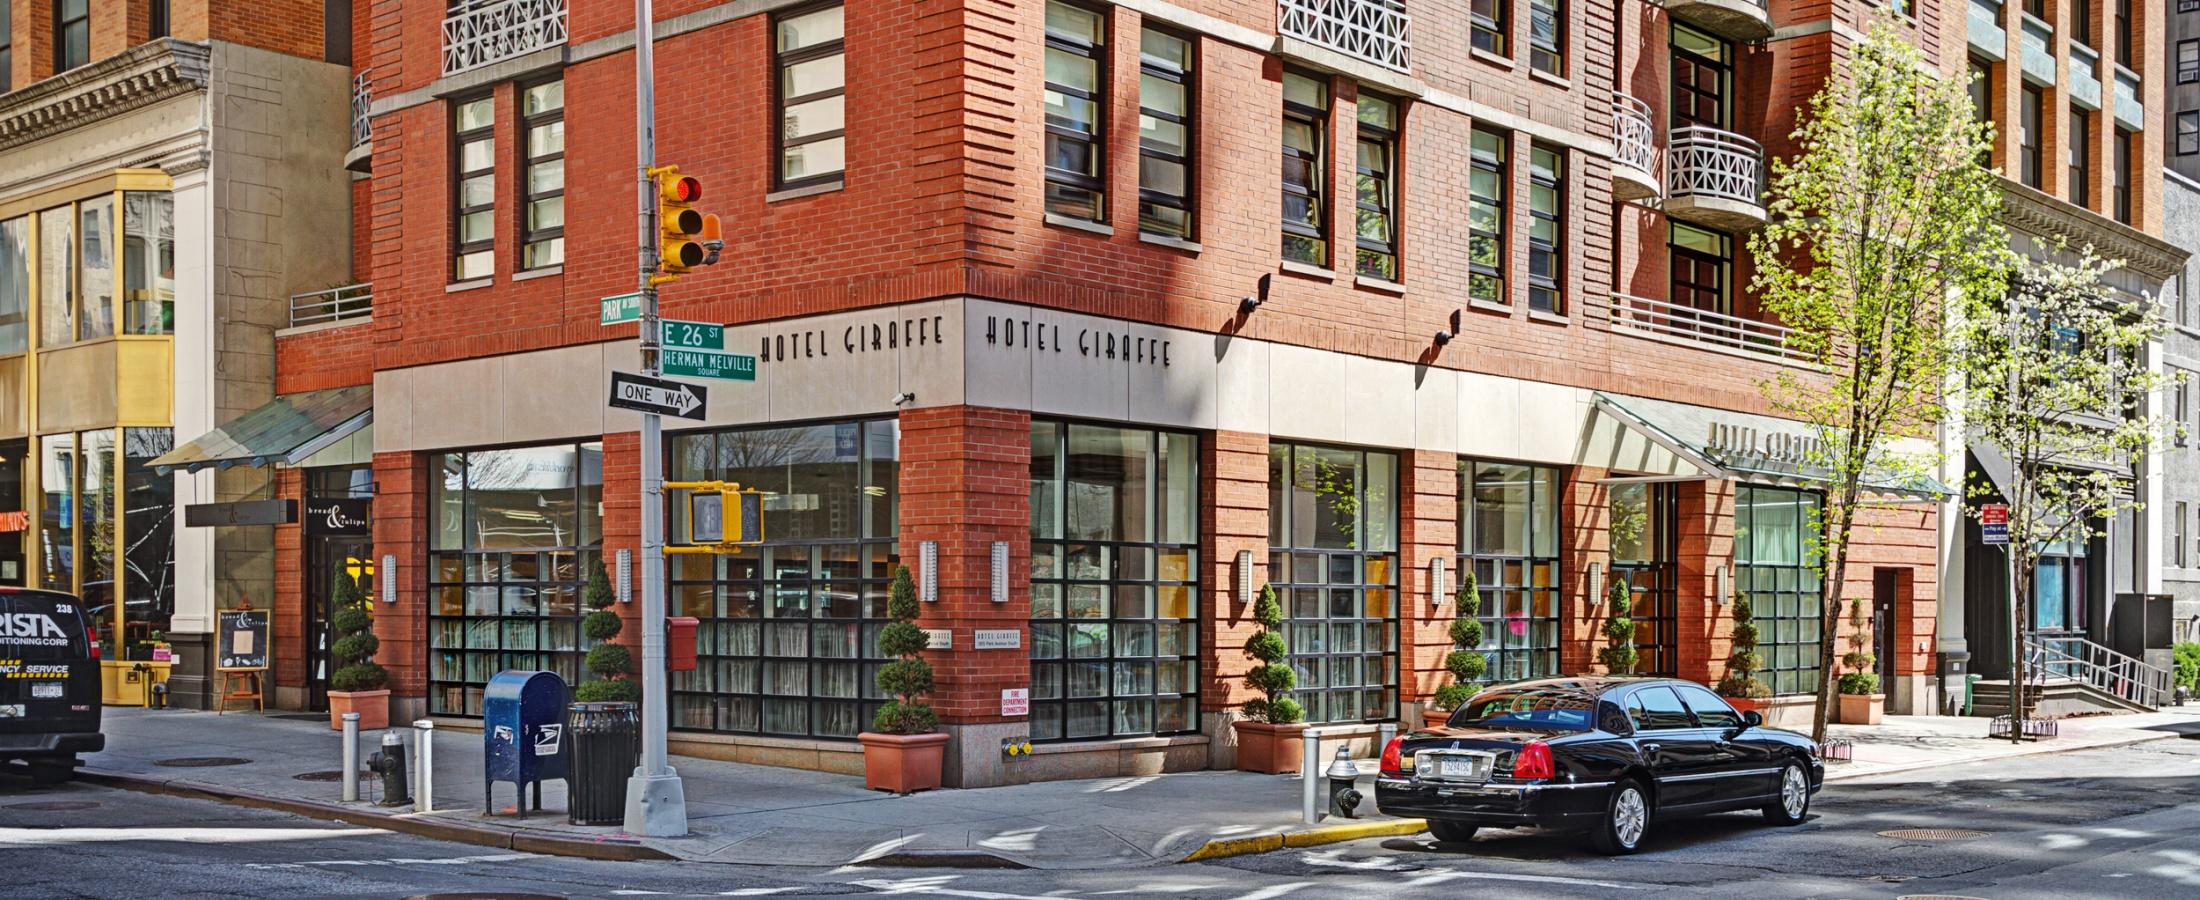 Hotel Giraffe is located on the corner of East 26th St and Park Ave South, just east of Madison Square Park.